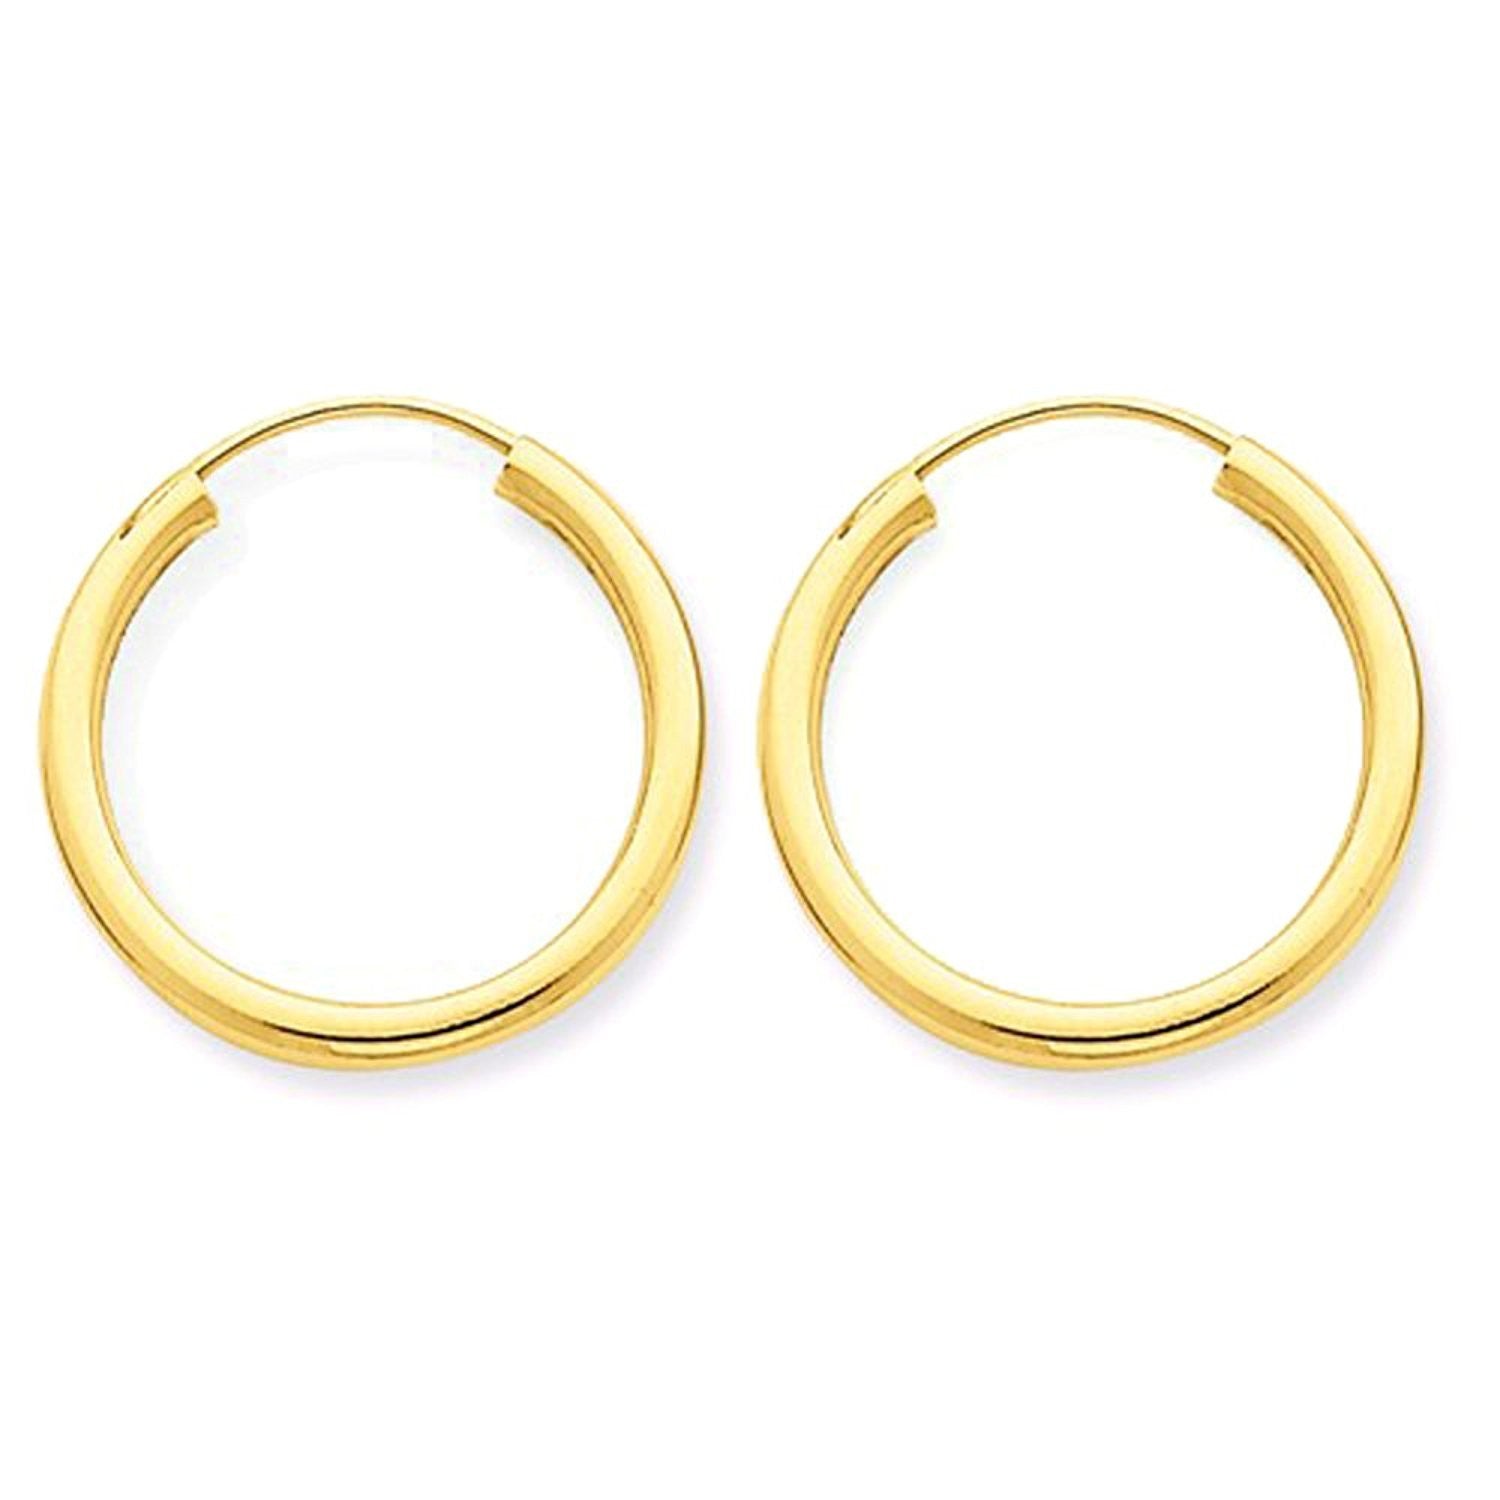 14K Yellow Gold 16mm x 2mm Round Endless Hoop Earrings